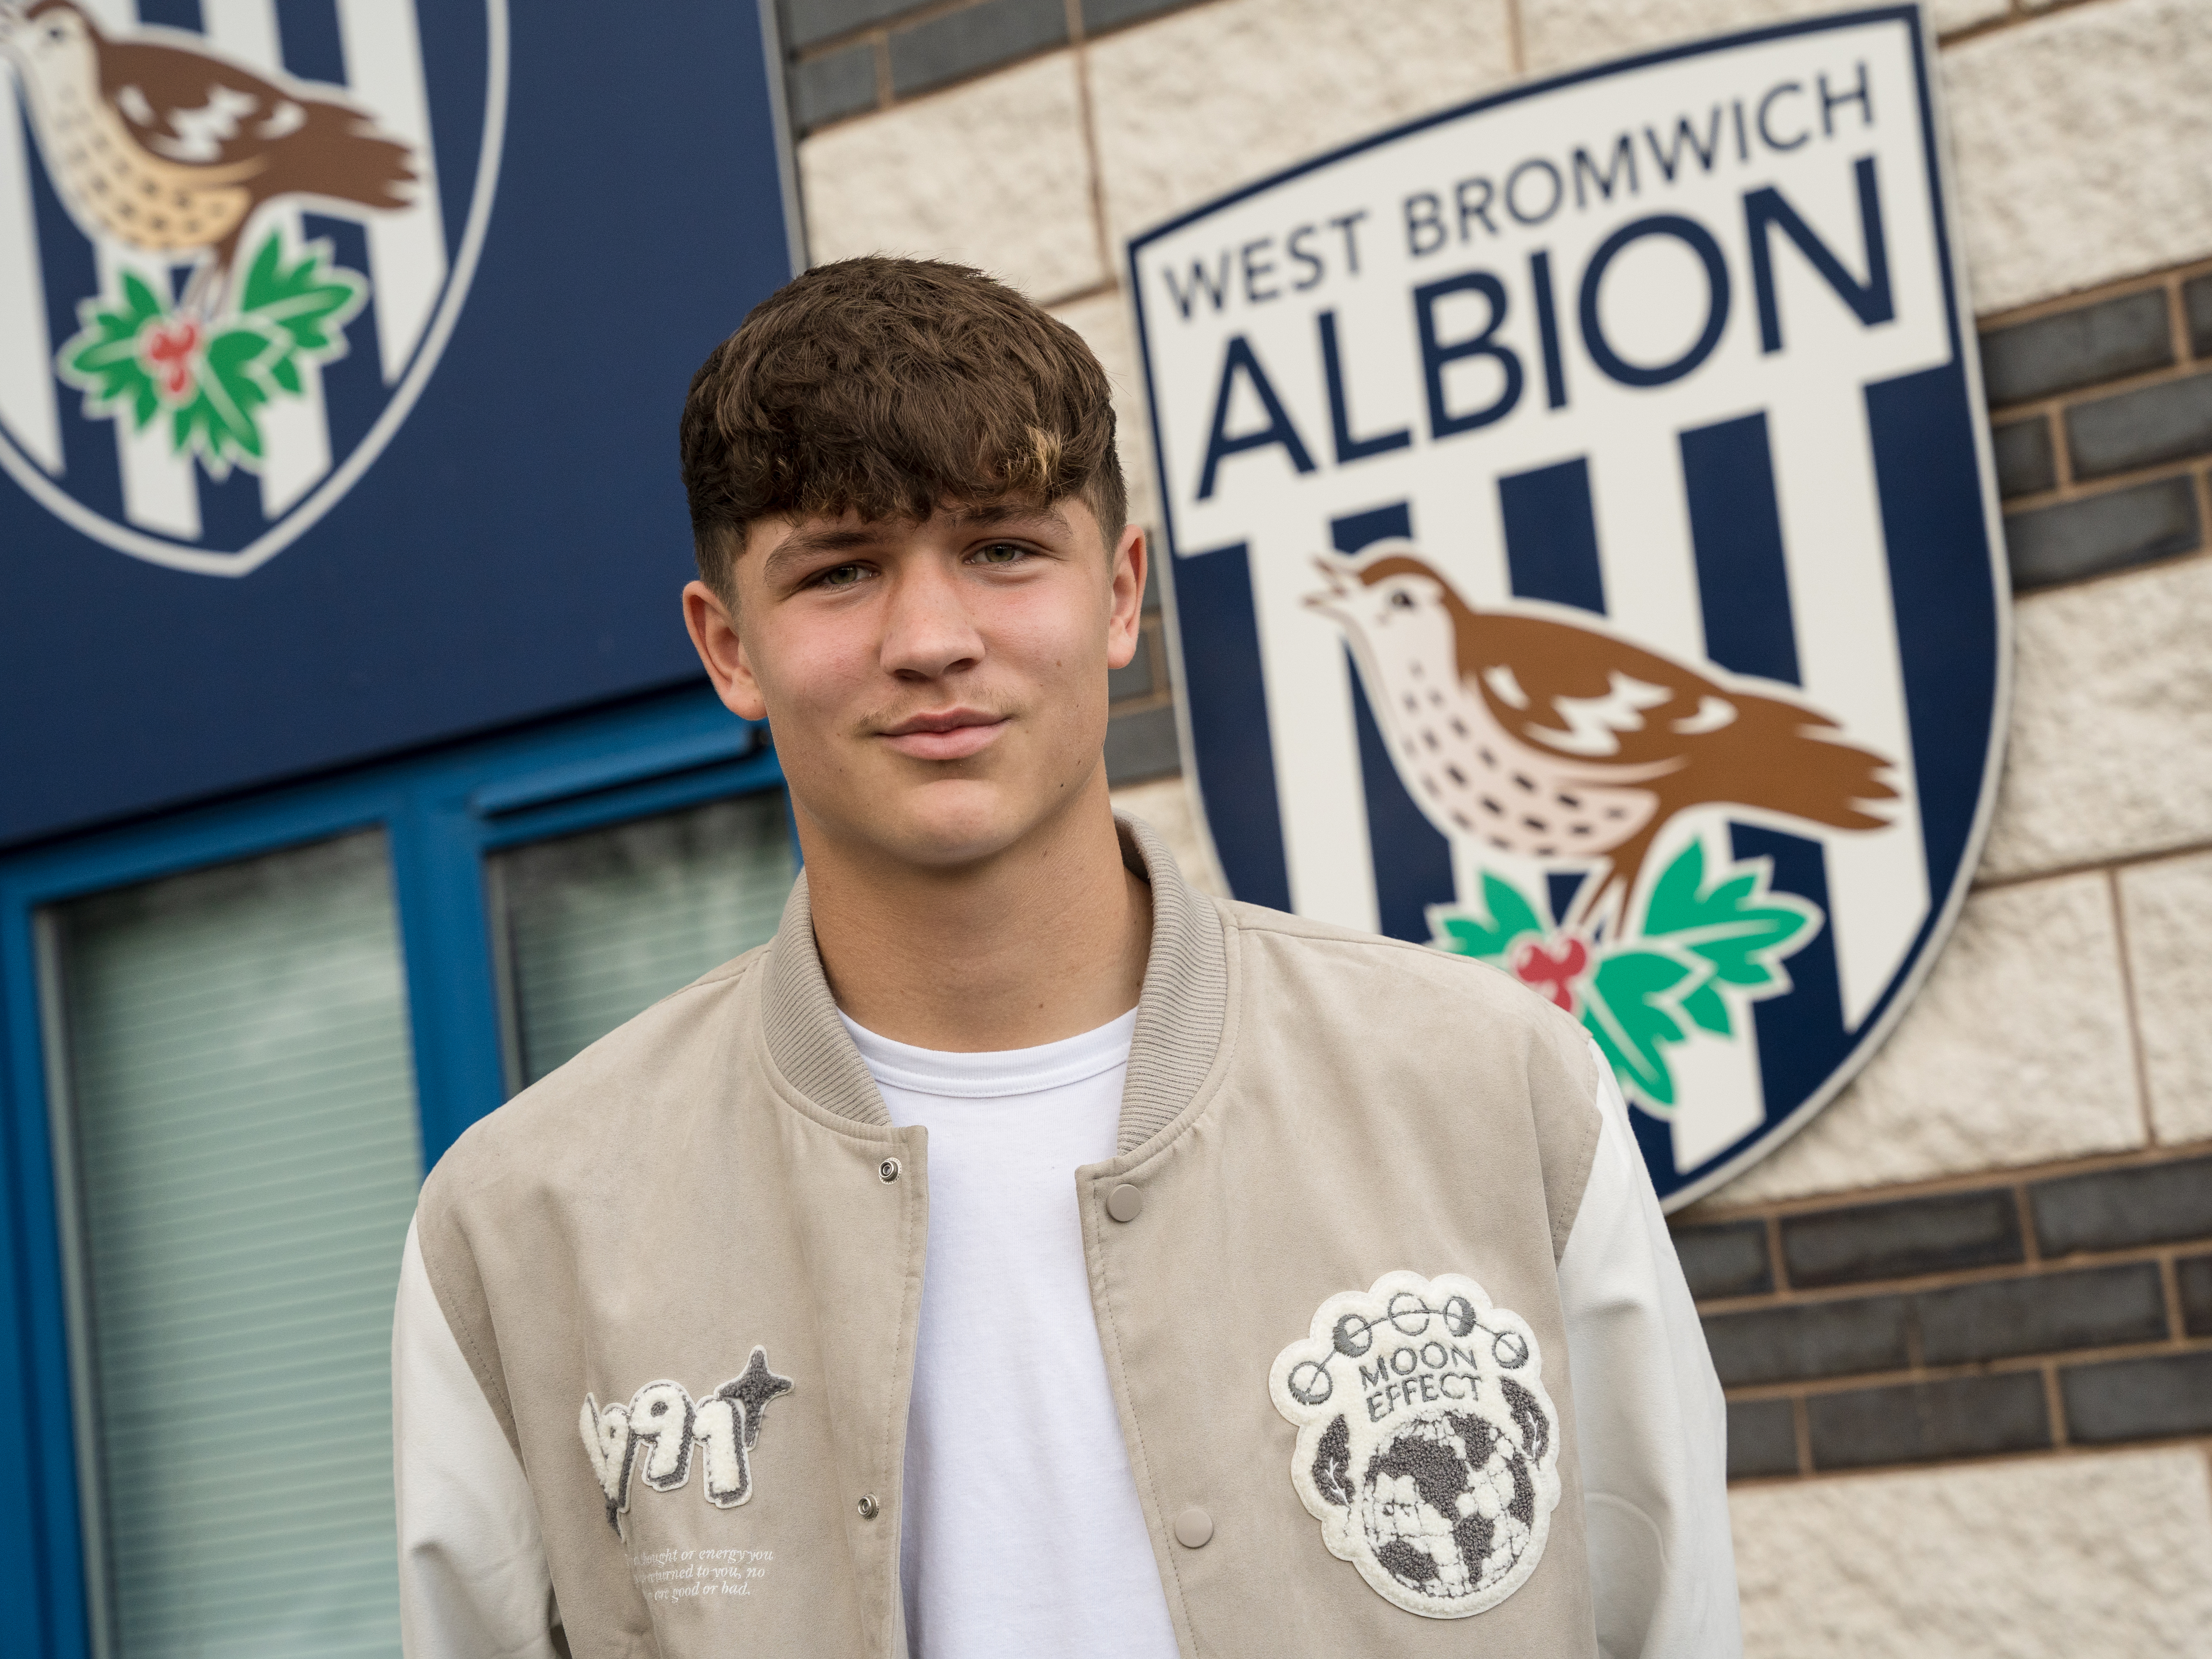 A photo of Albion youngster Cole Deeming in front of the Albion badge at the training ground